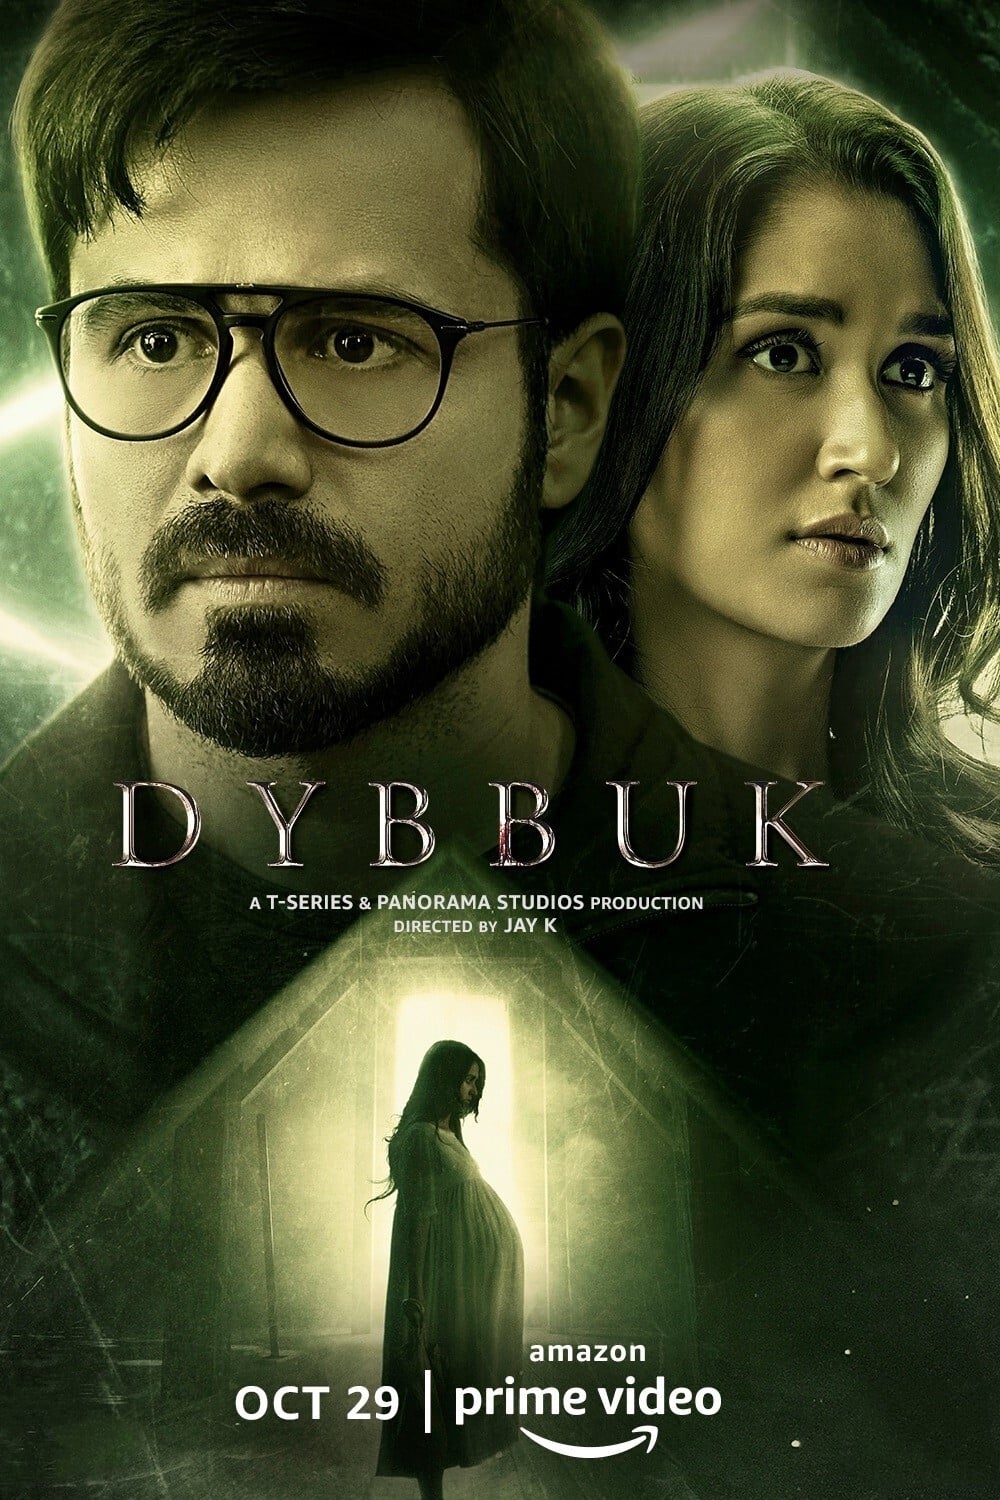 Poster for the movie "Dybbuk"